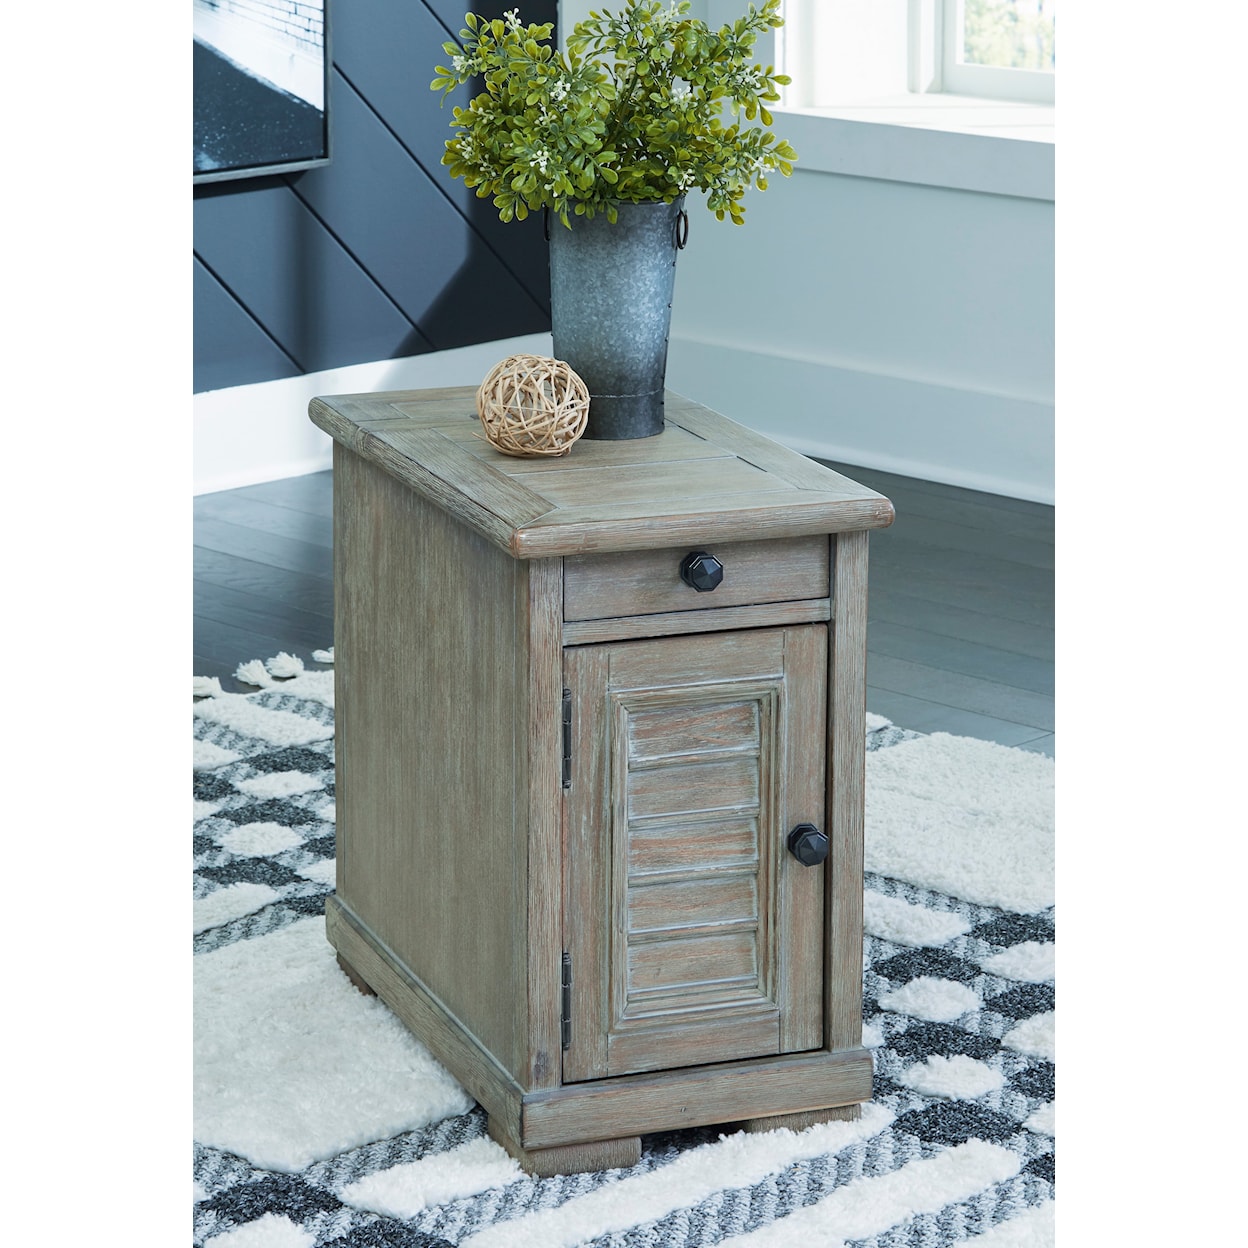 Benchcraft Moreshire Chairside End Table